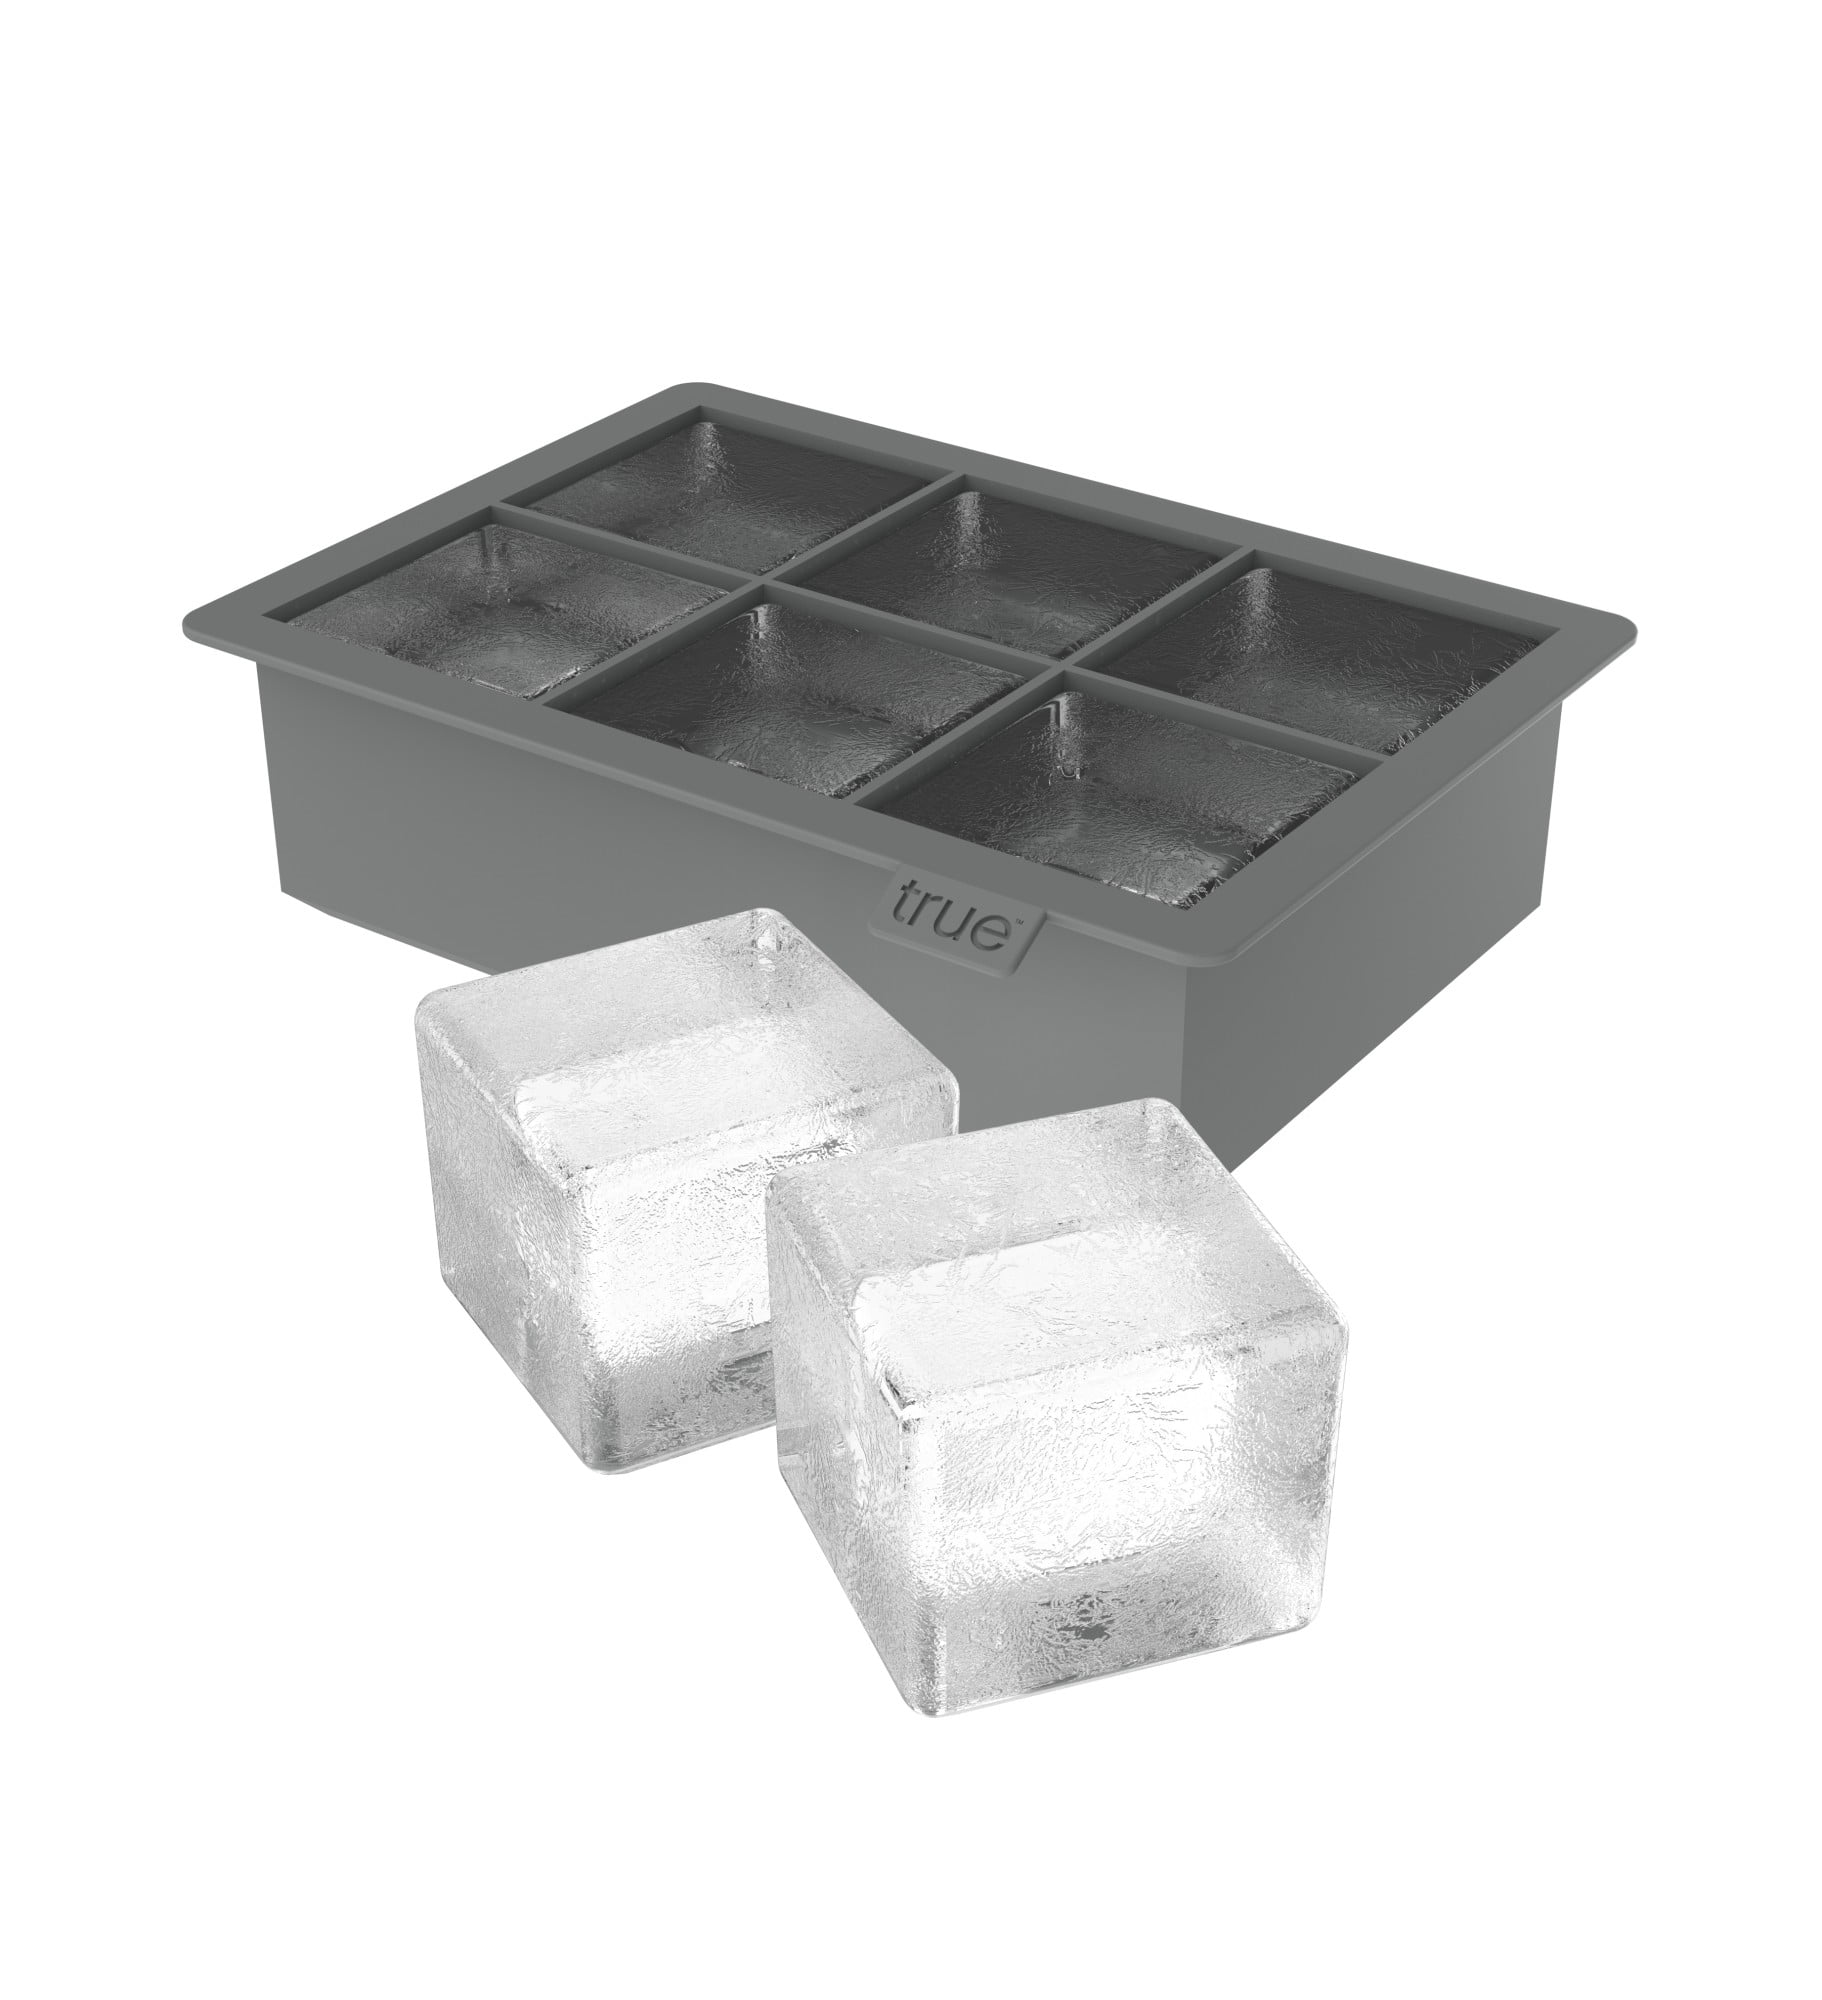  Large Cube Silicone Ice Tray, 2 Pack by Kitch, Giant 2 Inch Ice  Cubes Keep Your Drink Cooled for Hours - Cobalt Blue: Home & Kitchen